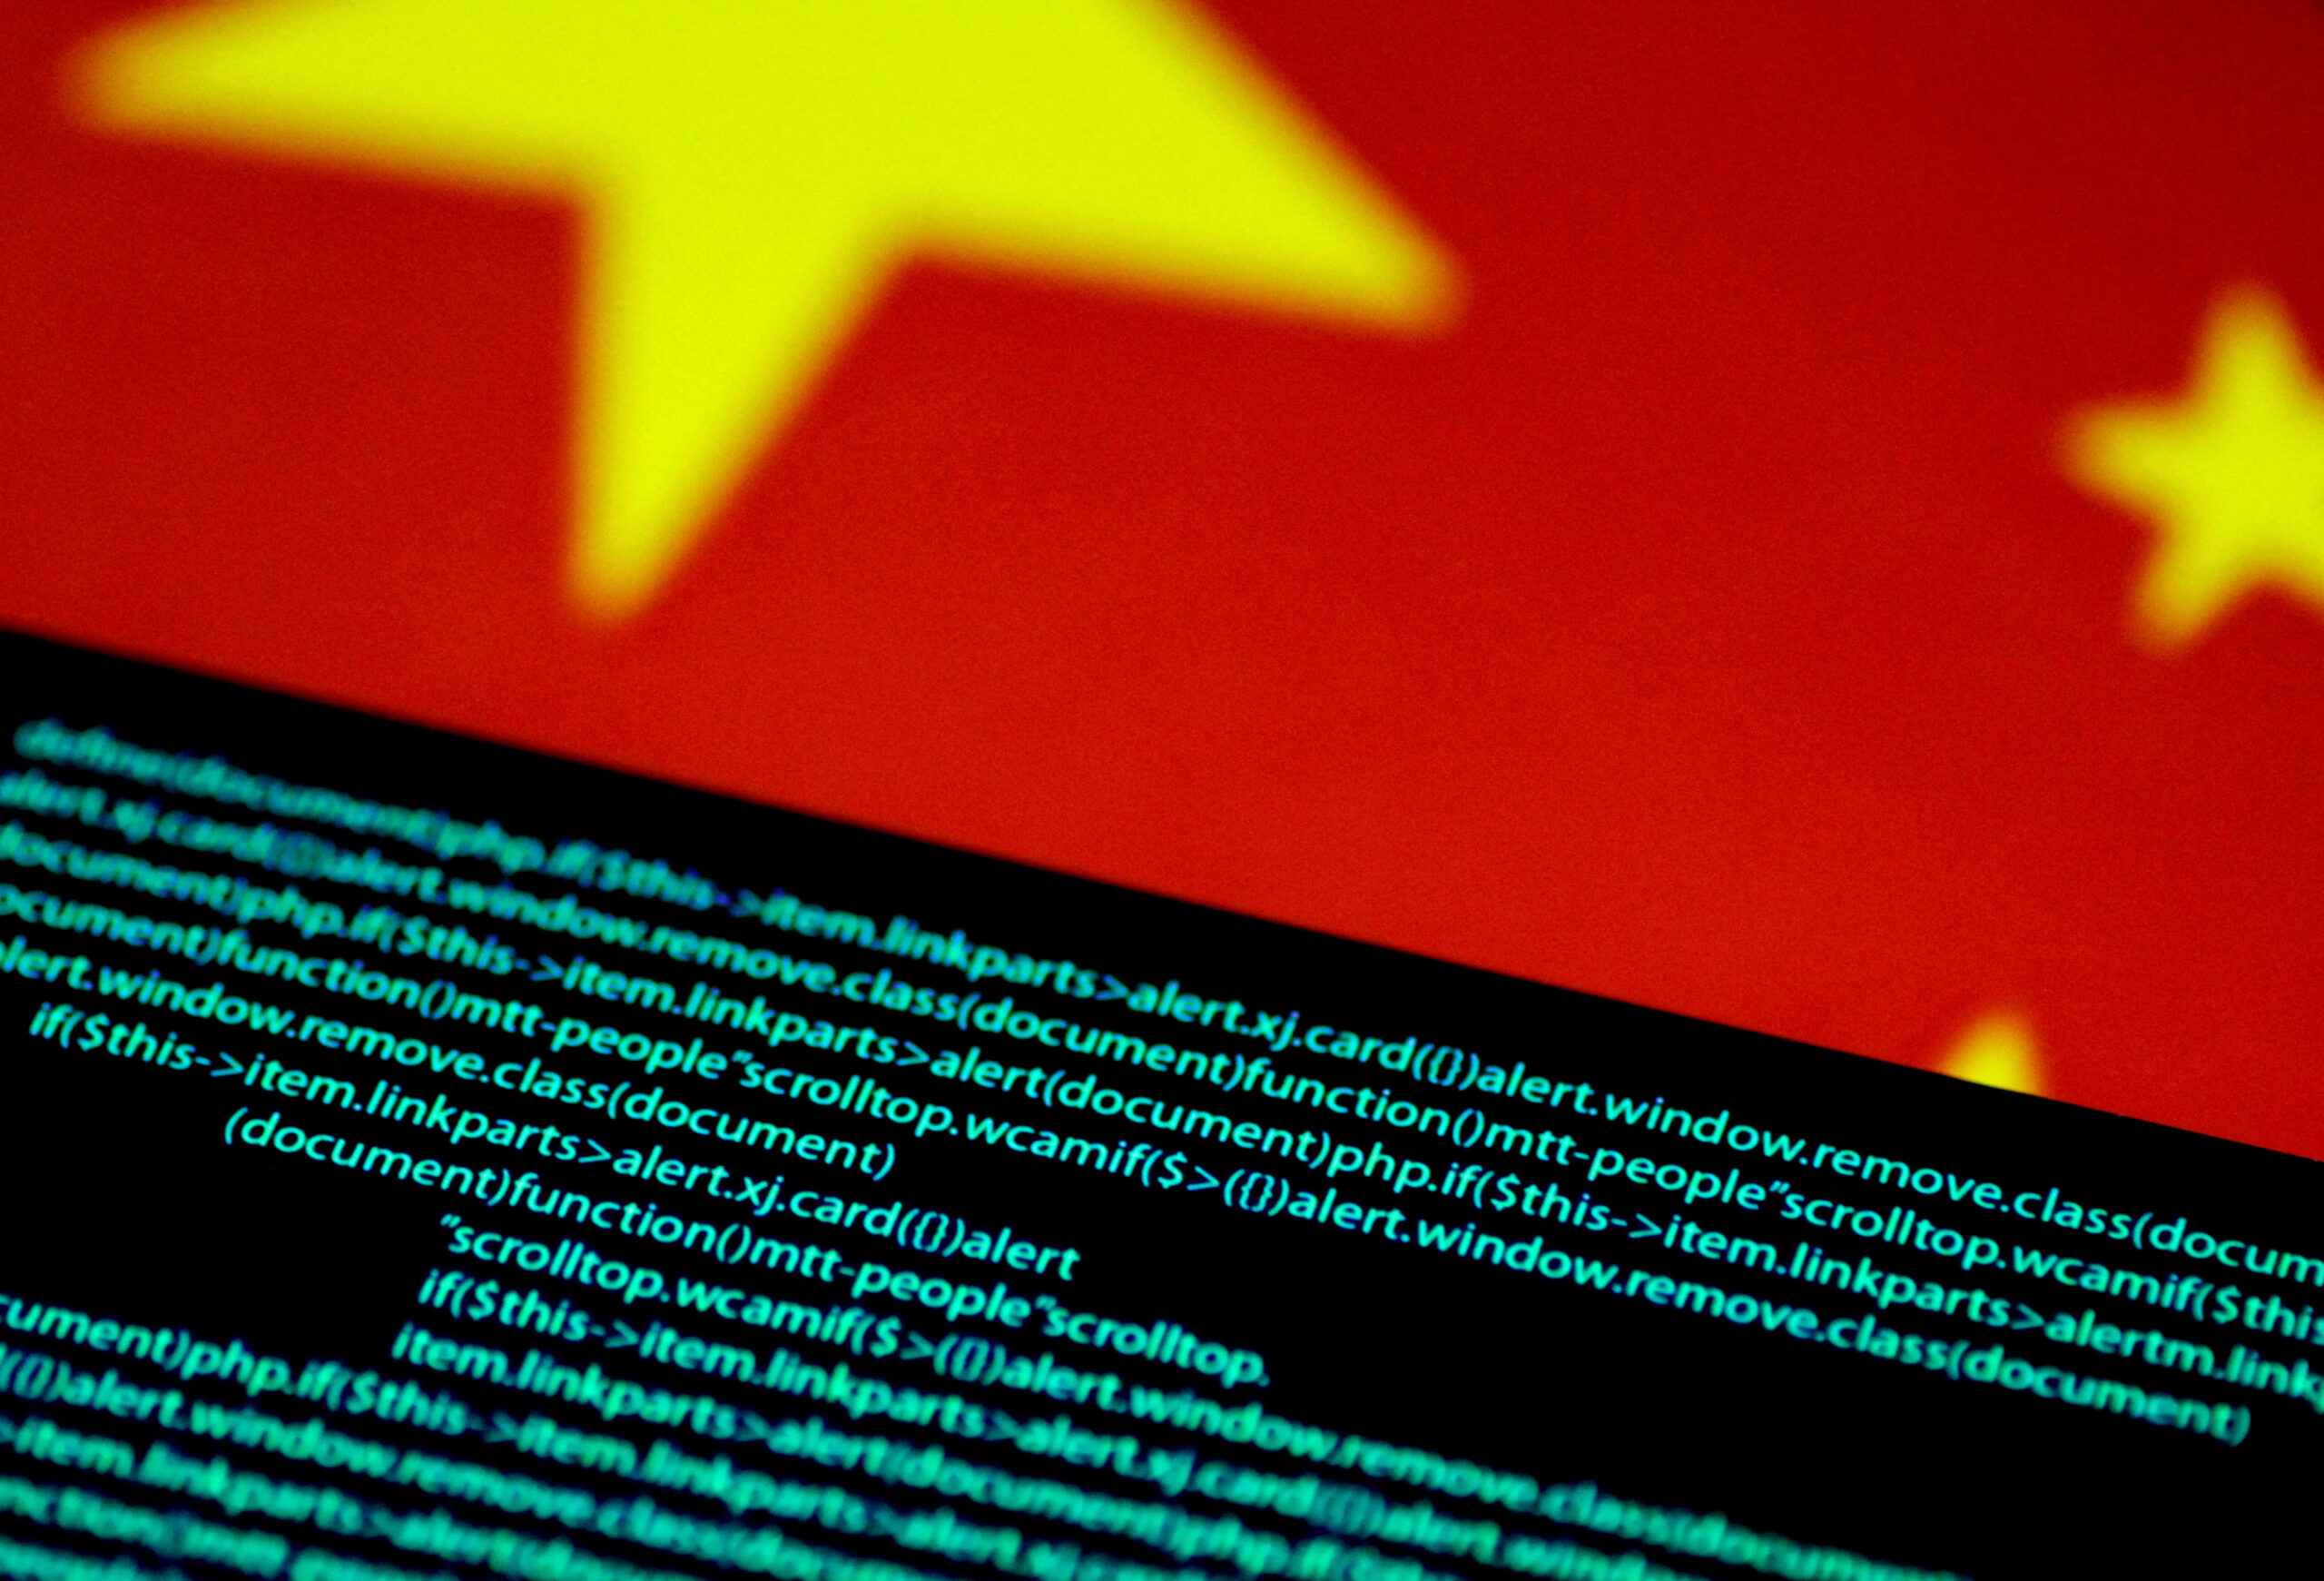 Clear and Present Danger: China’s hacking threat poses global security challenge